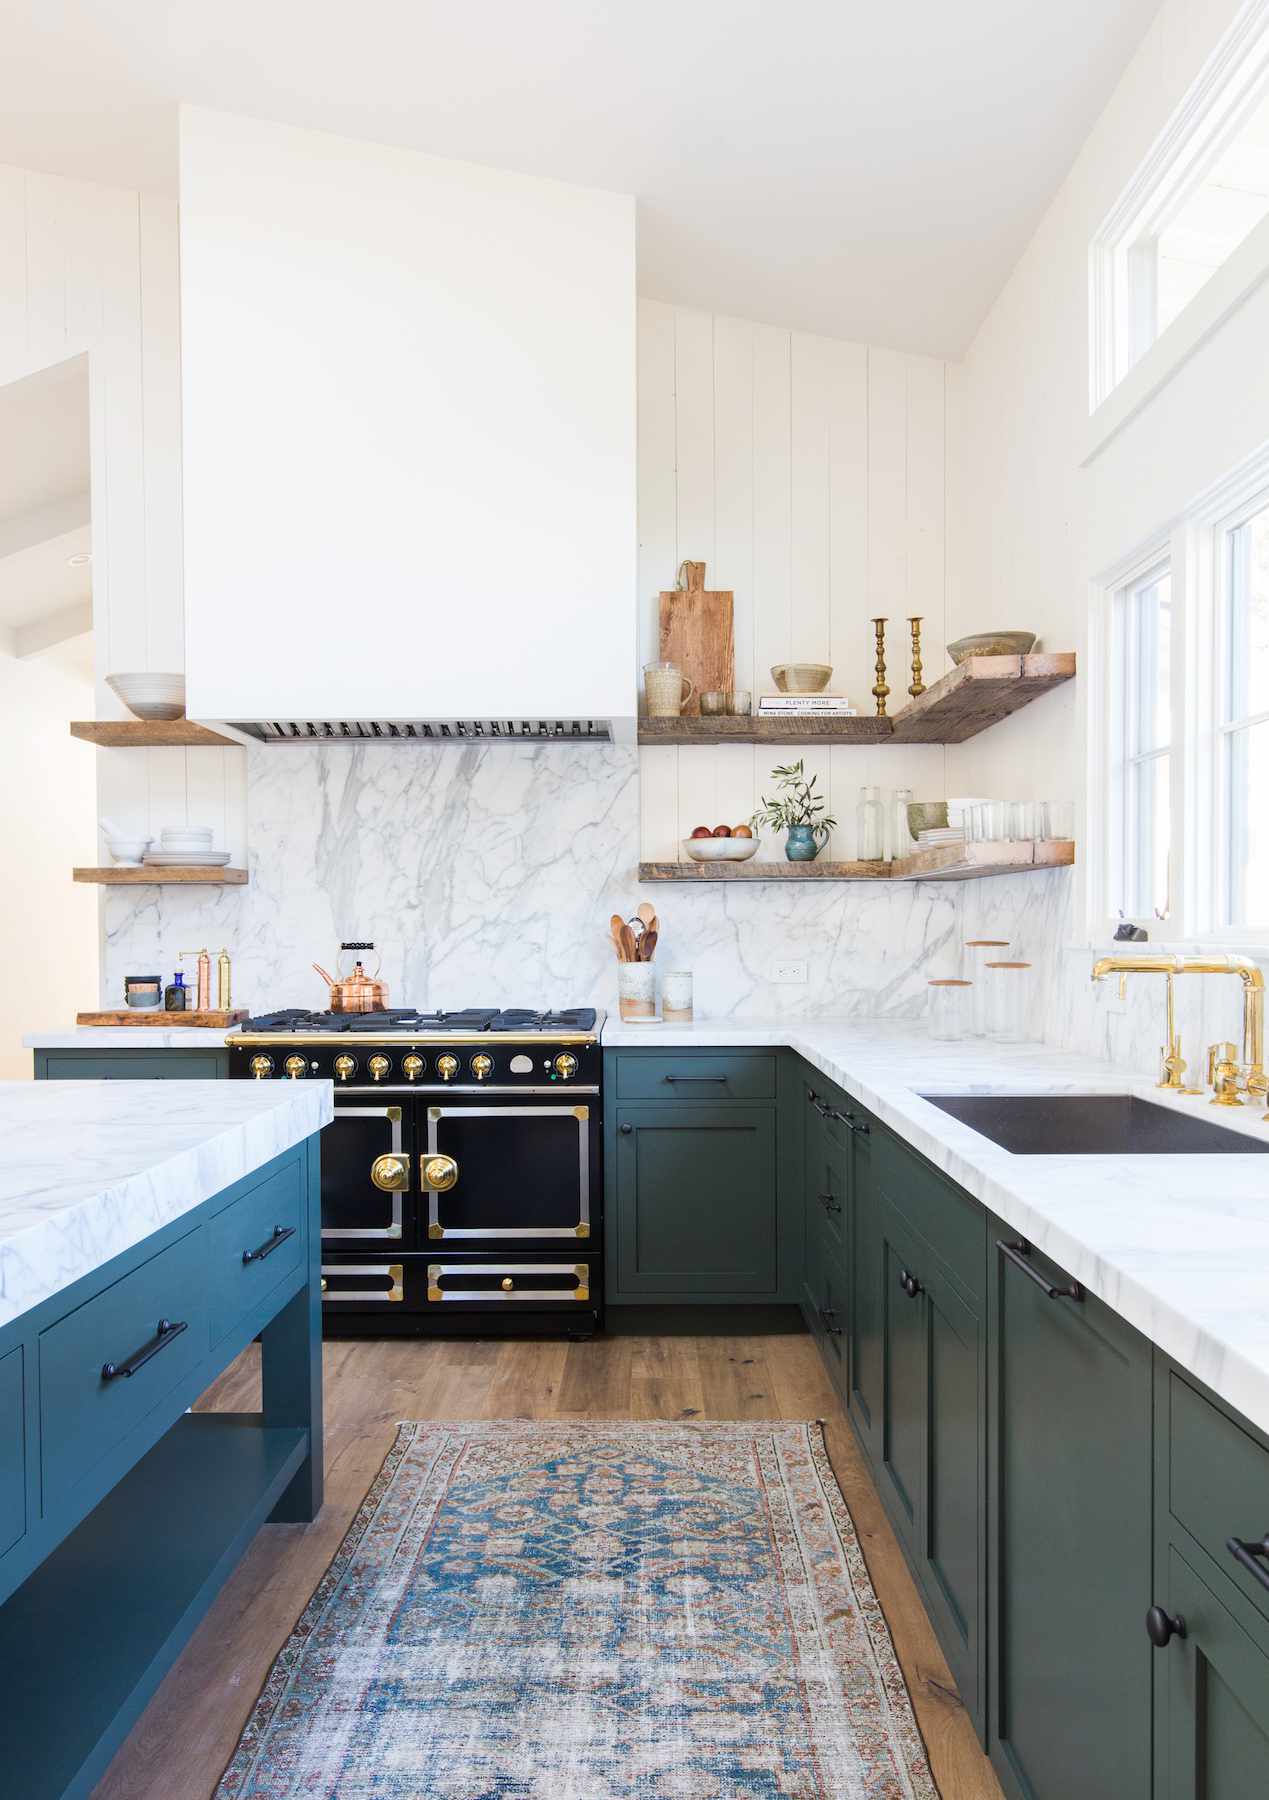 The Best Kitchen Paint Colors According To Interior Designers